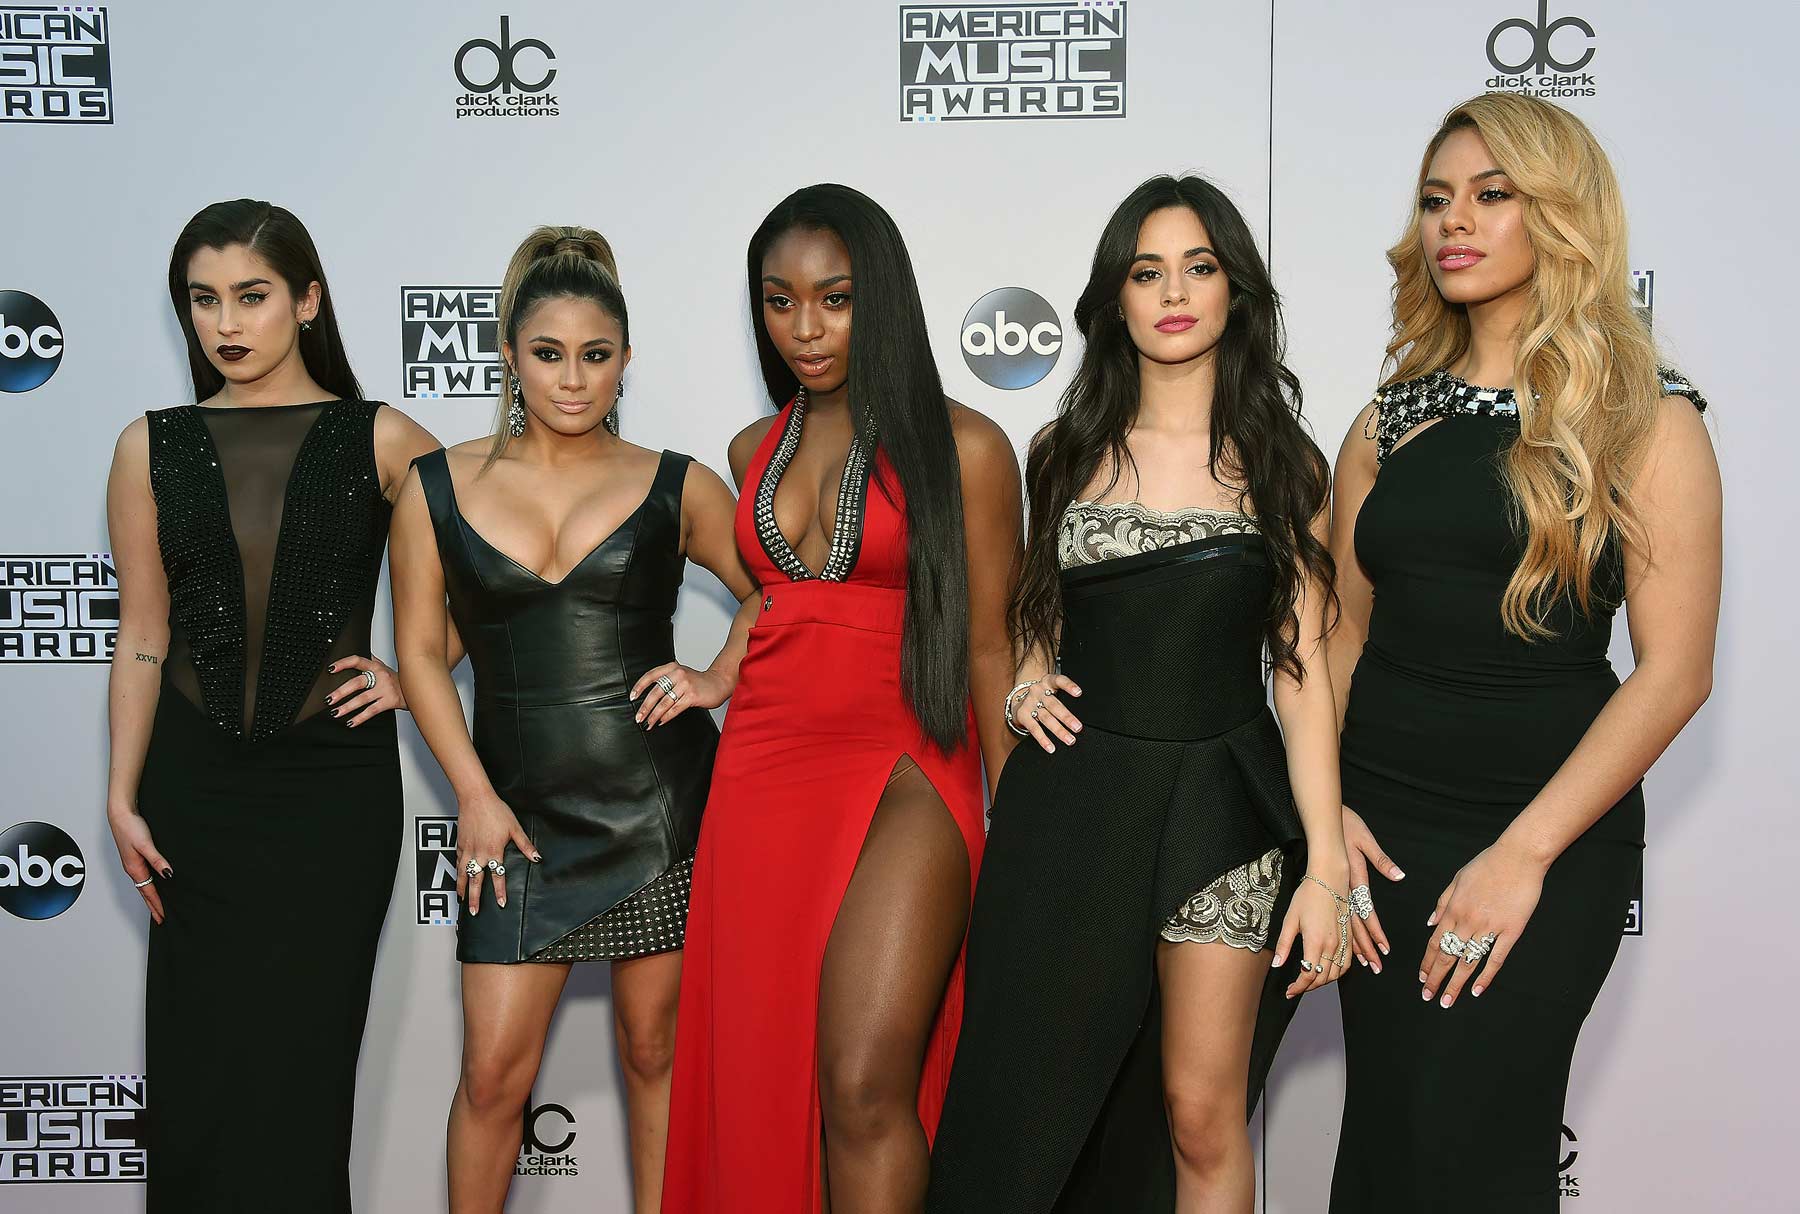 Ally Brooke attends American Music Awards